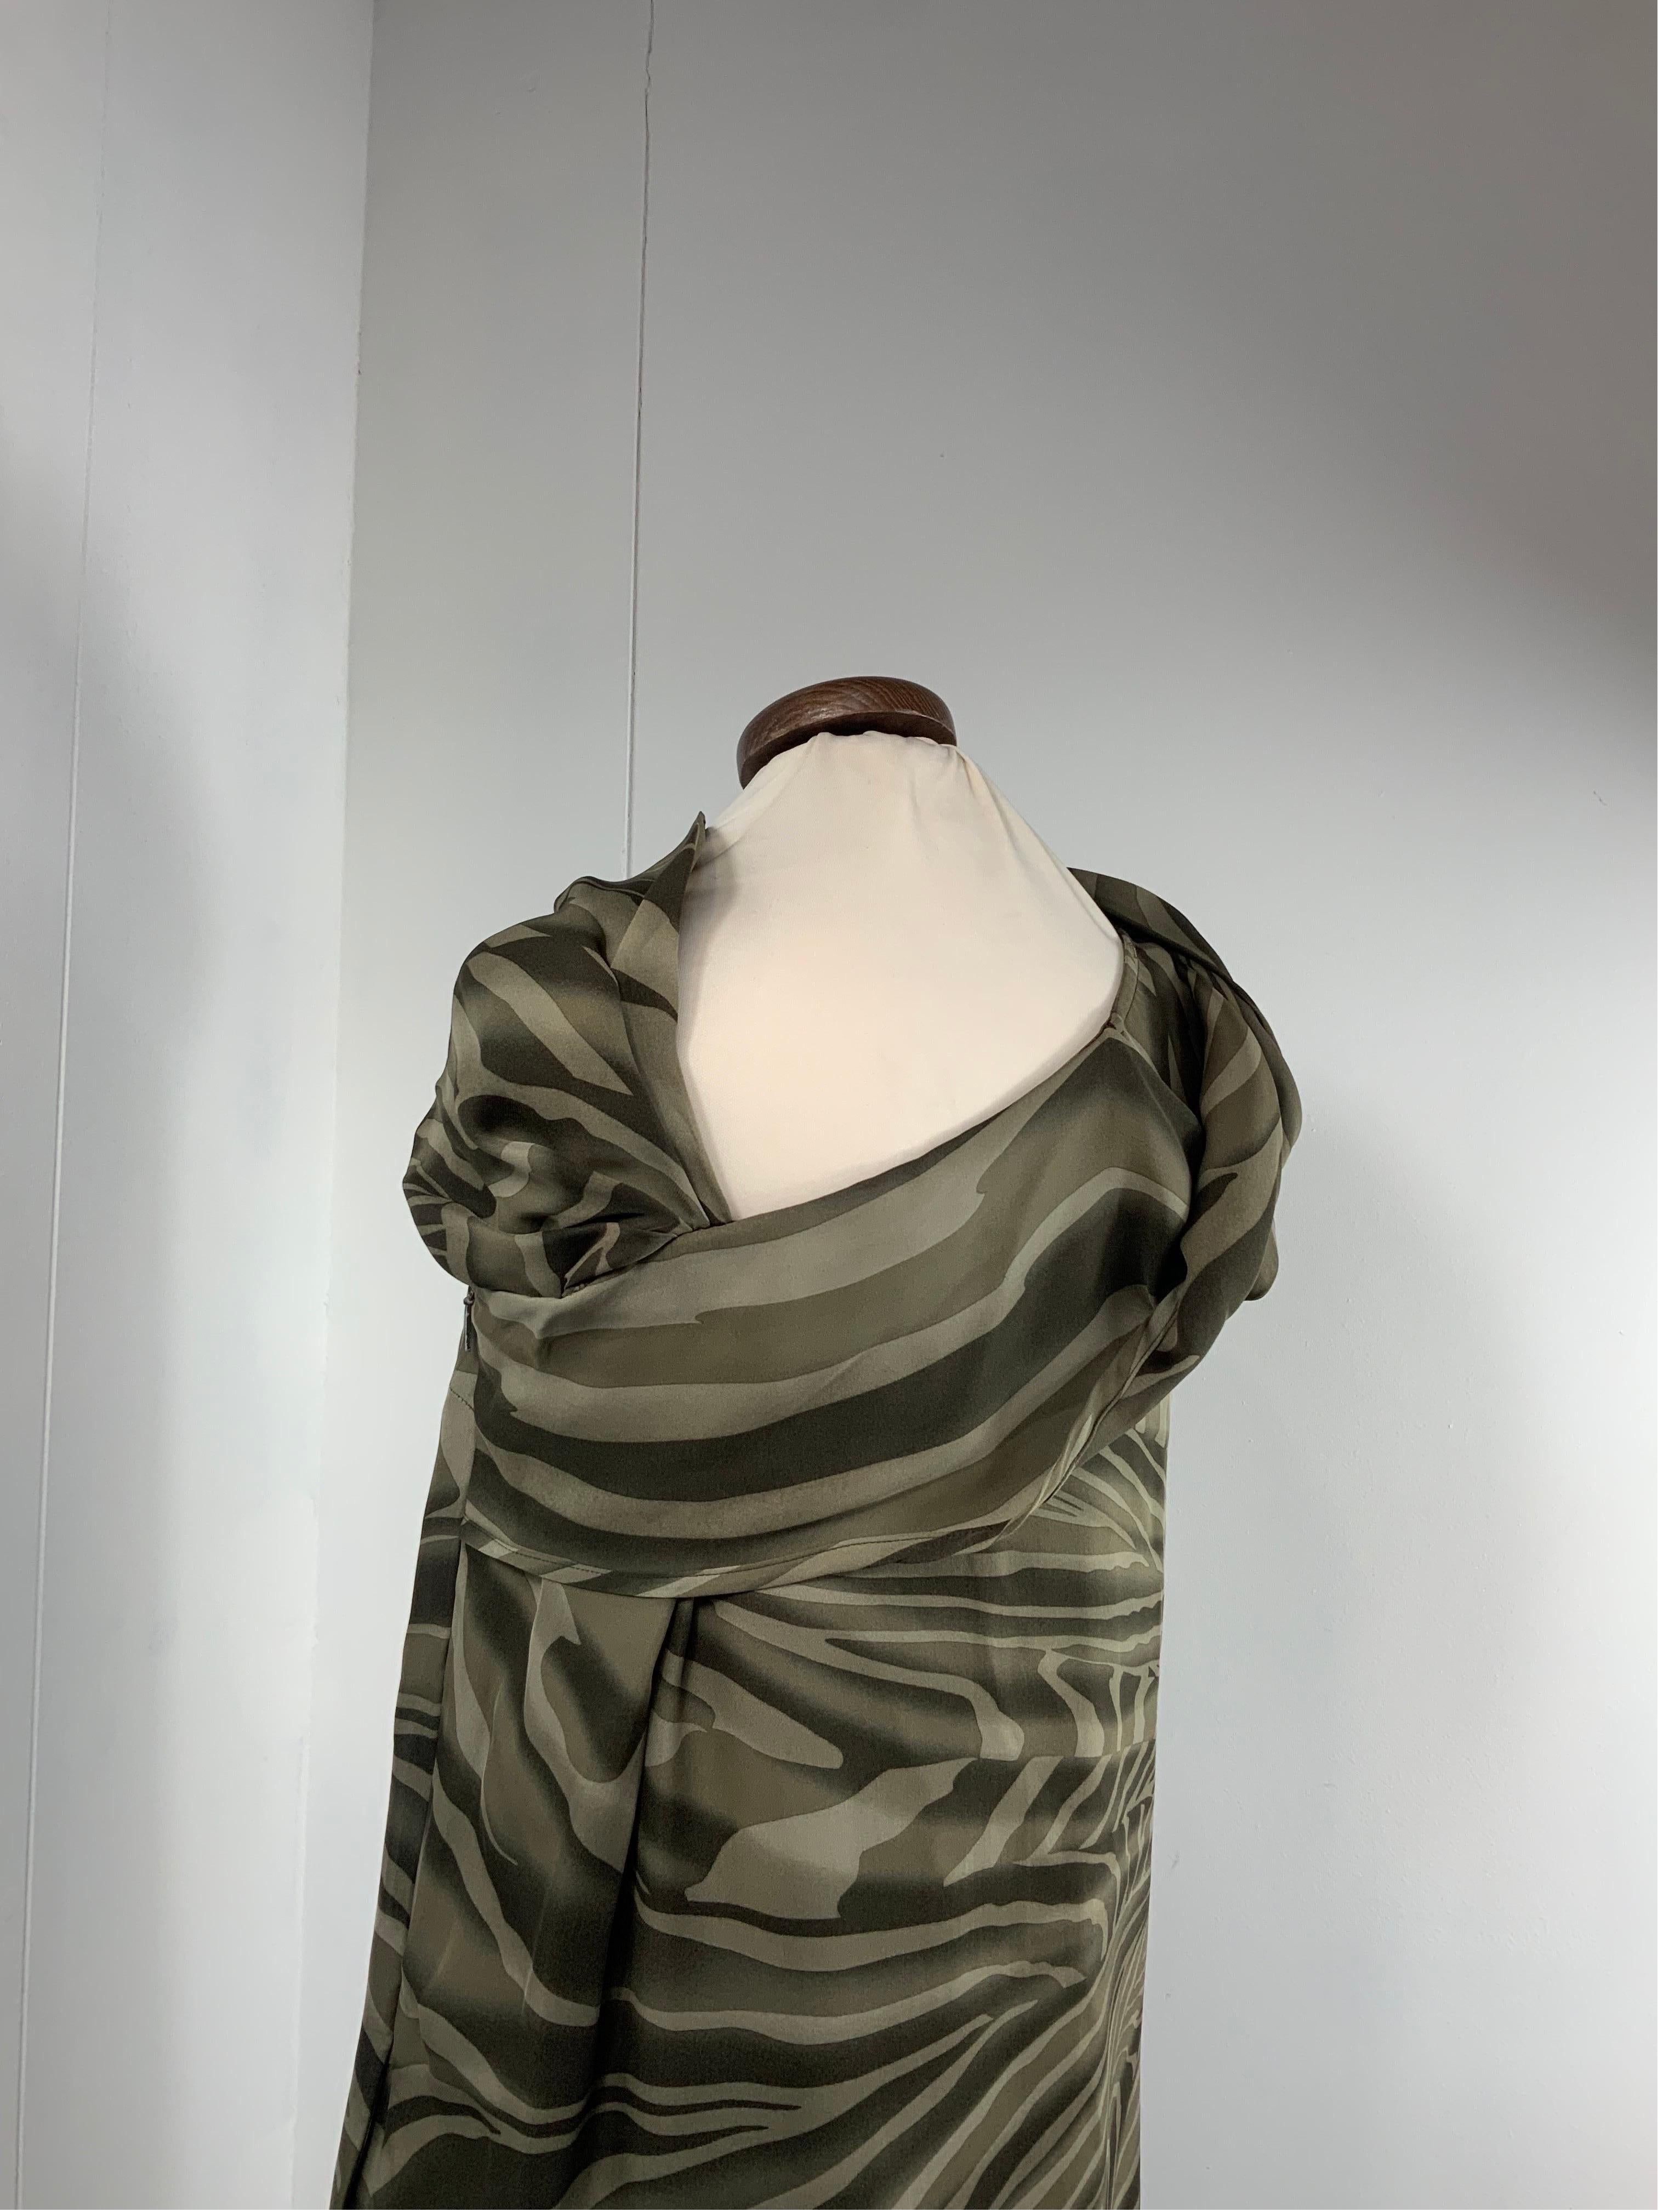 Gucci zebra 2000 Dress by Tom Ford In Excellent Condition For Sale In Carnate, IT